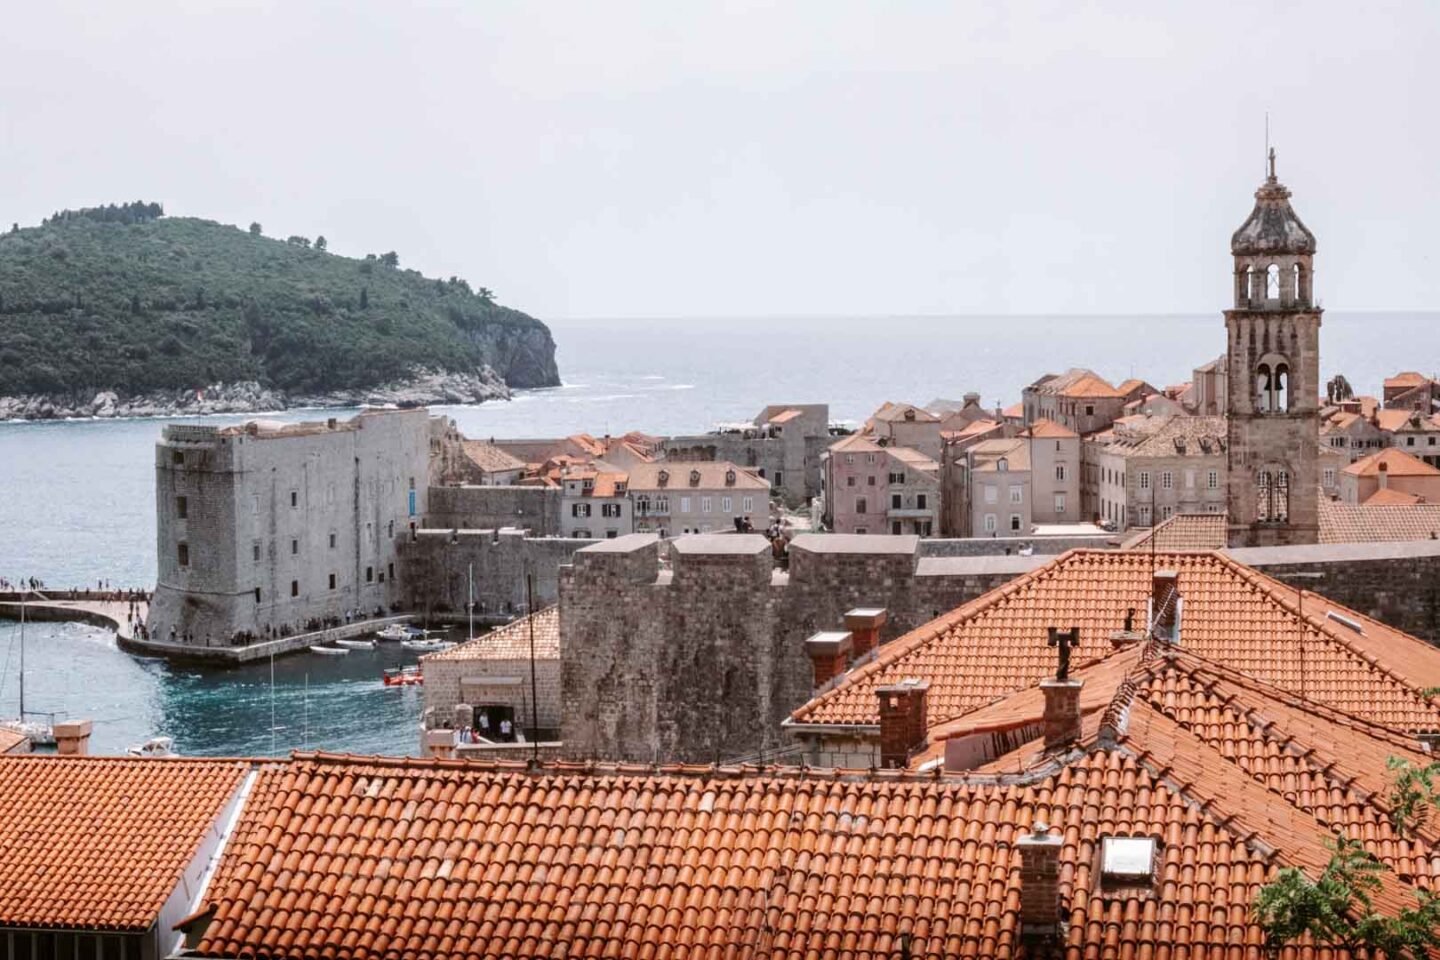 Dubrovnik Old Town, one day in Dubrovnik